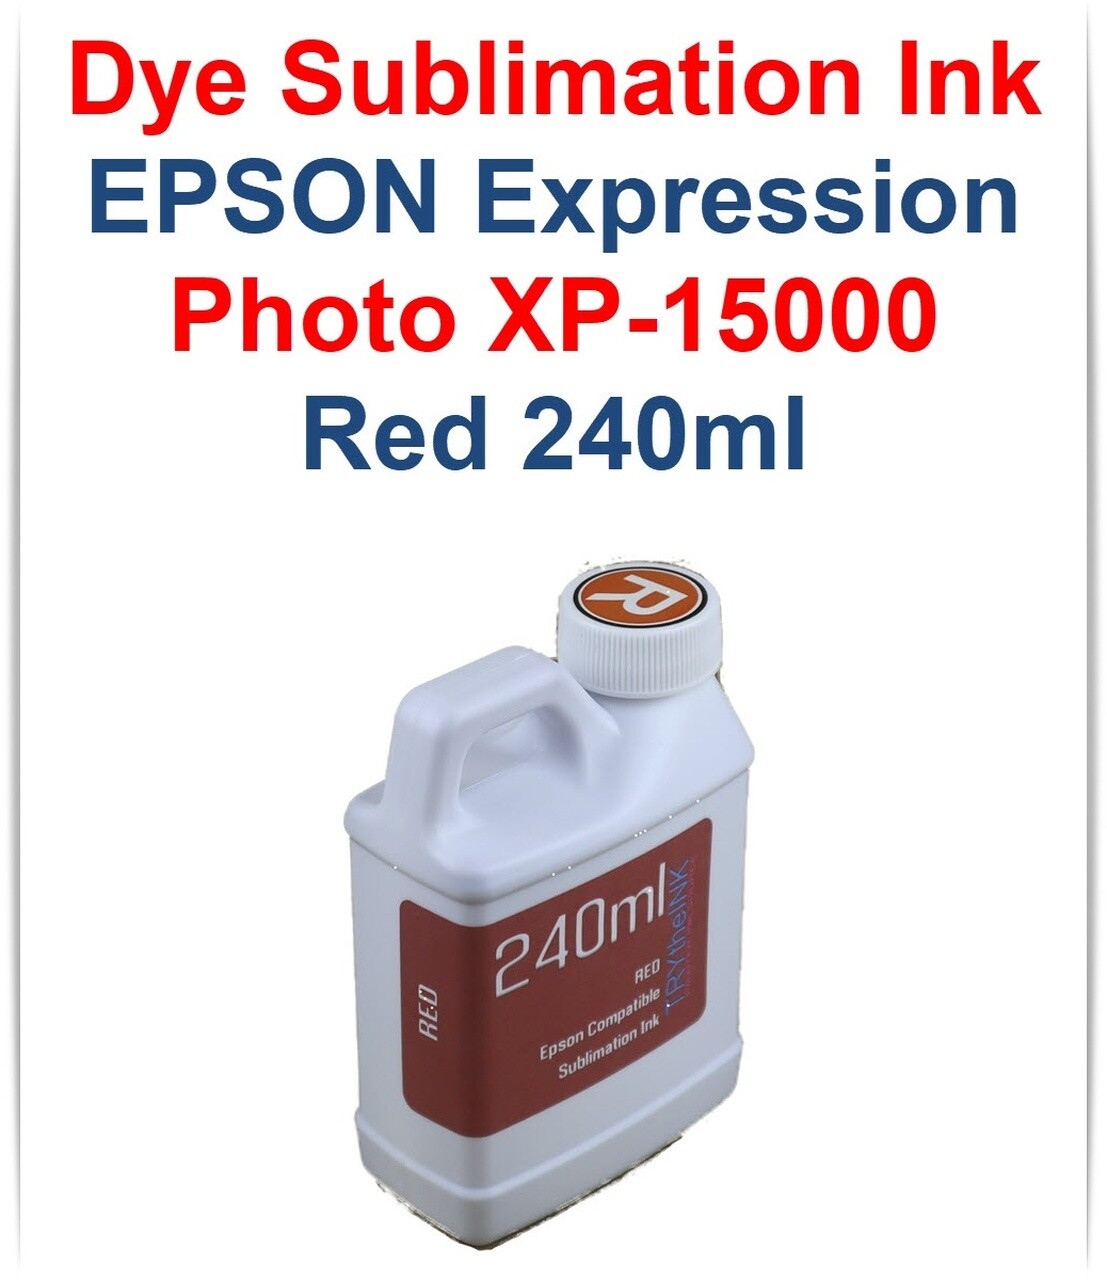 Red Dye Sublimation Ink 240ml for Epson Expression Photo HD XP-15000 printer